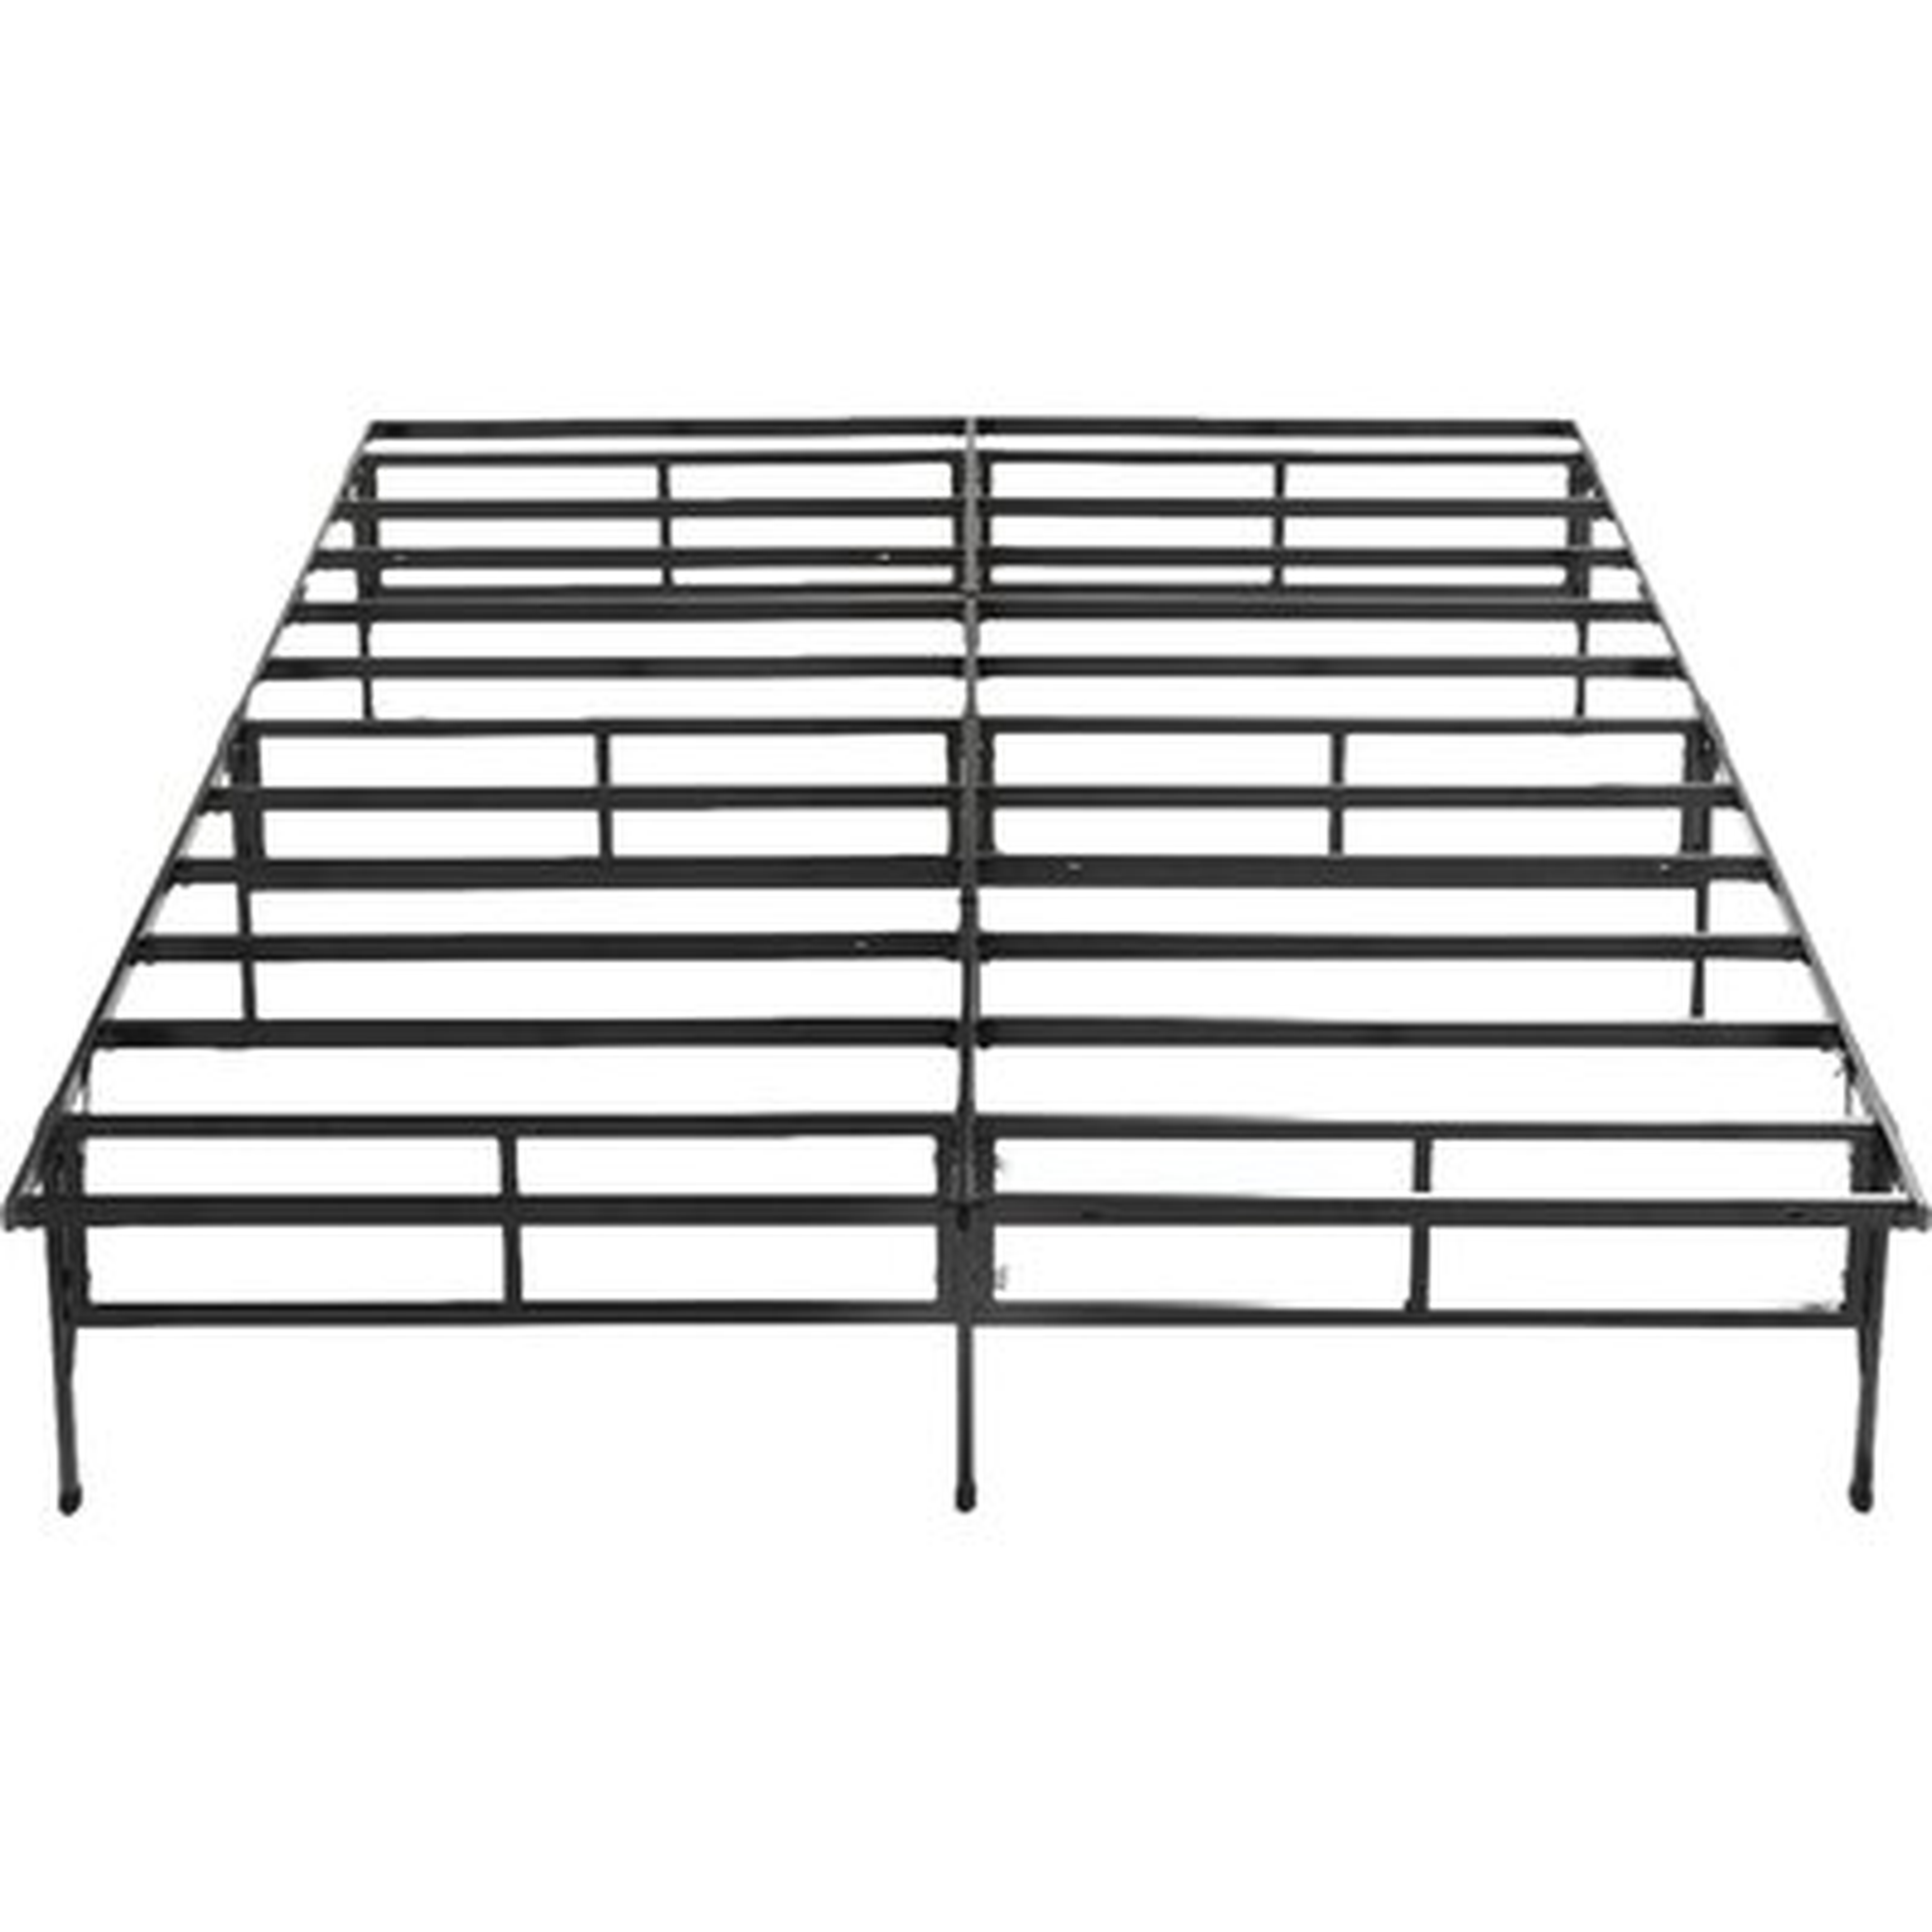 Higbee Easy to Assemble Smartbase Bed Frame - Wayfair